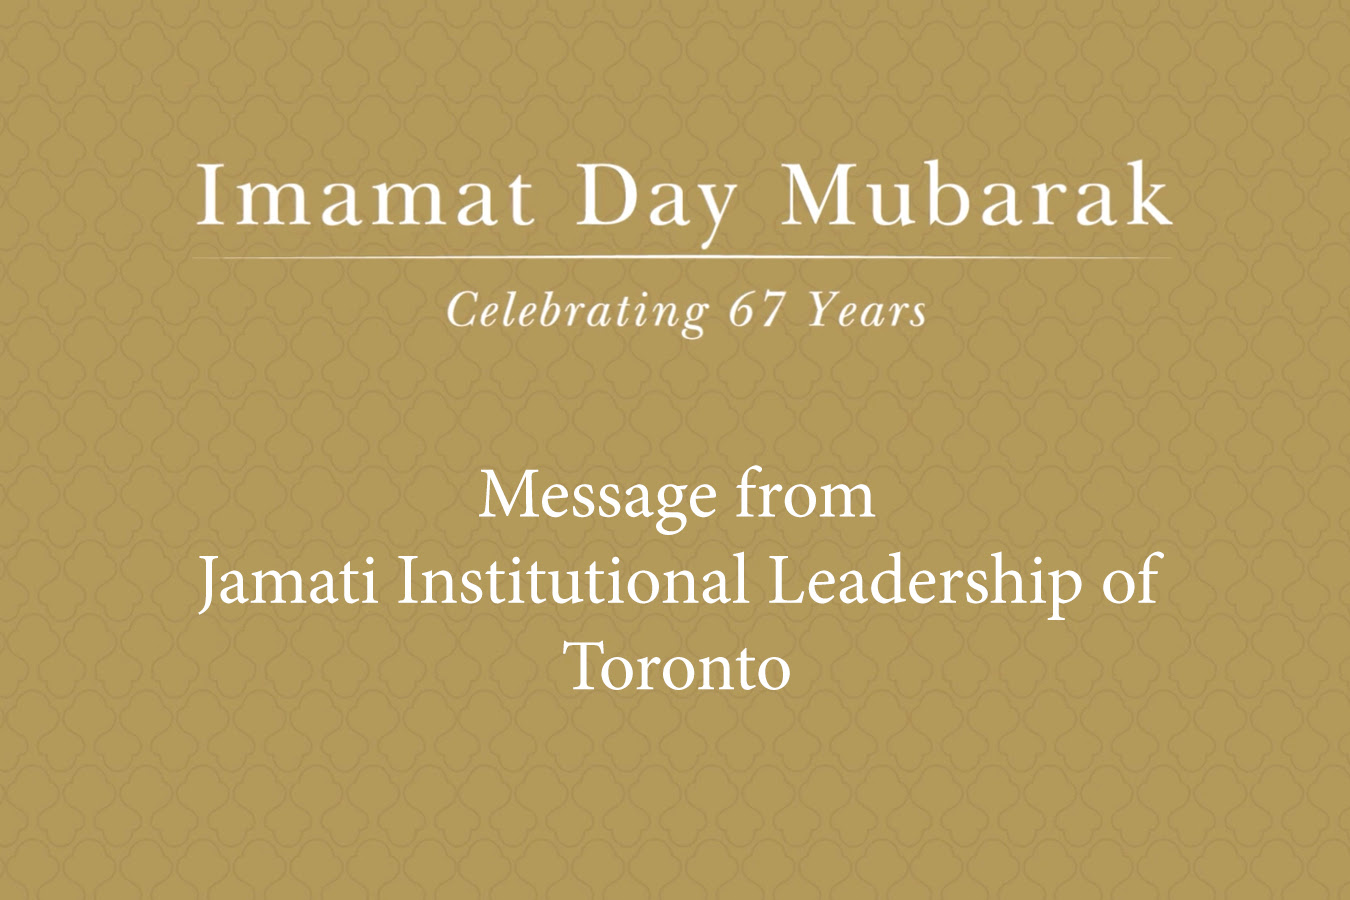 Watch a special Imamat Day Mubarak message from Jamati leadership